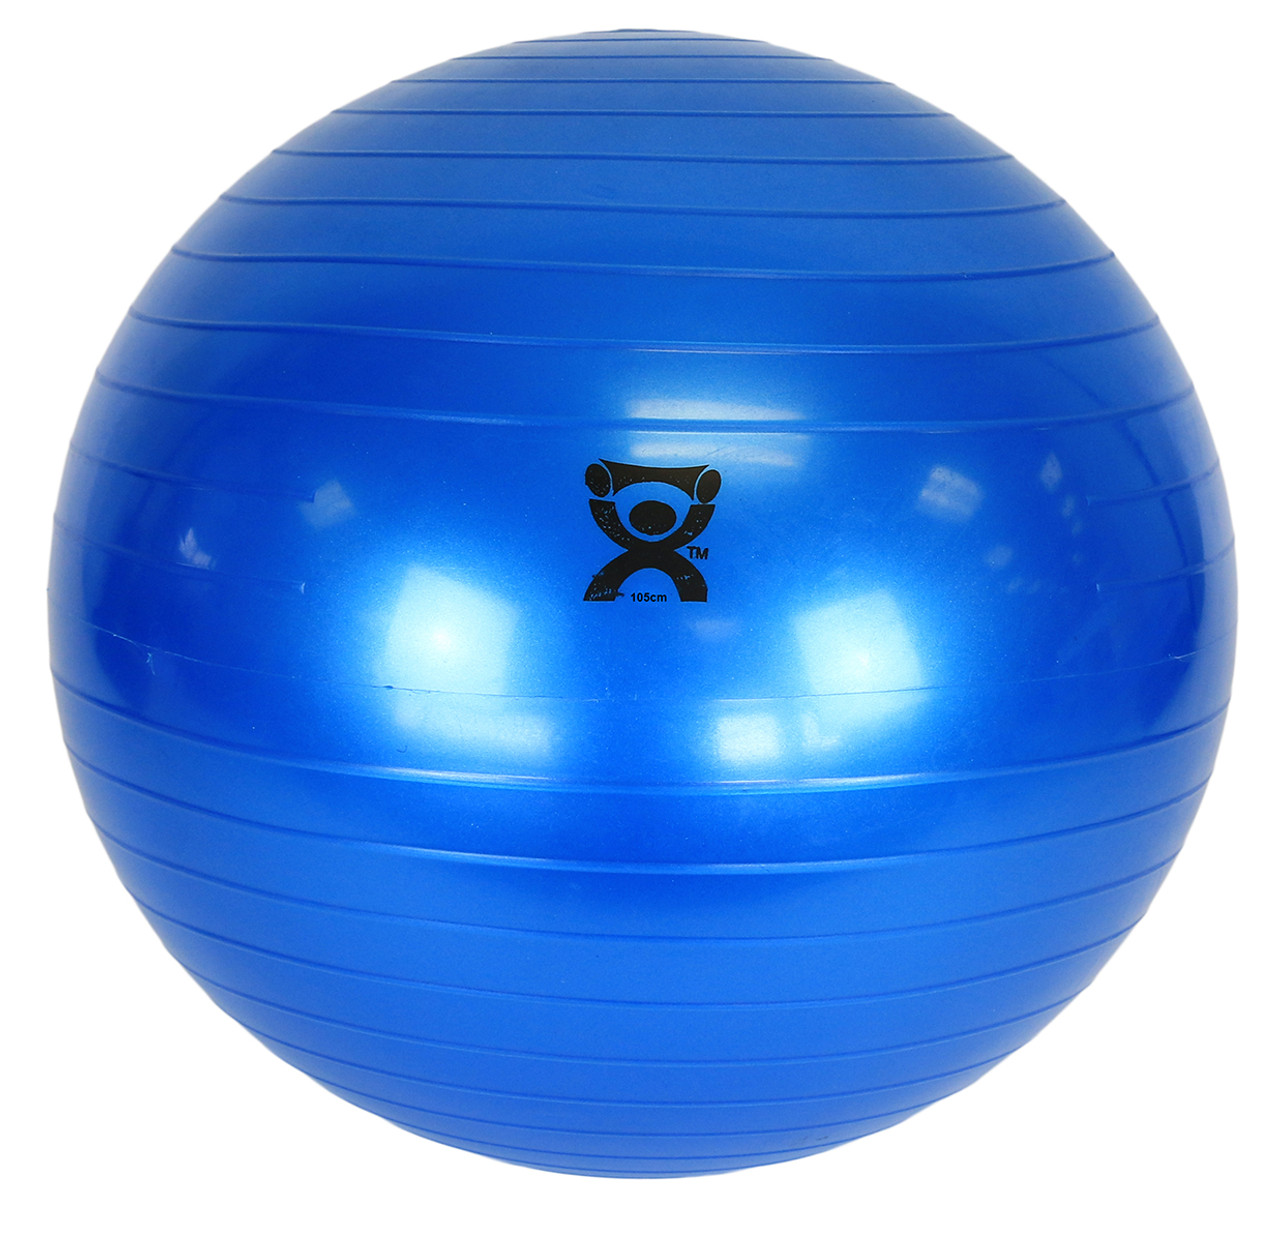 CanDo¨ Inflatable Exercise Ball - Blue - 42" (105 cm)